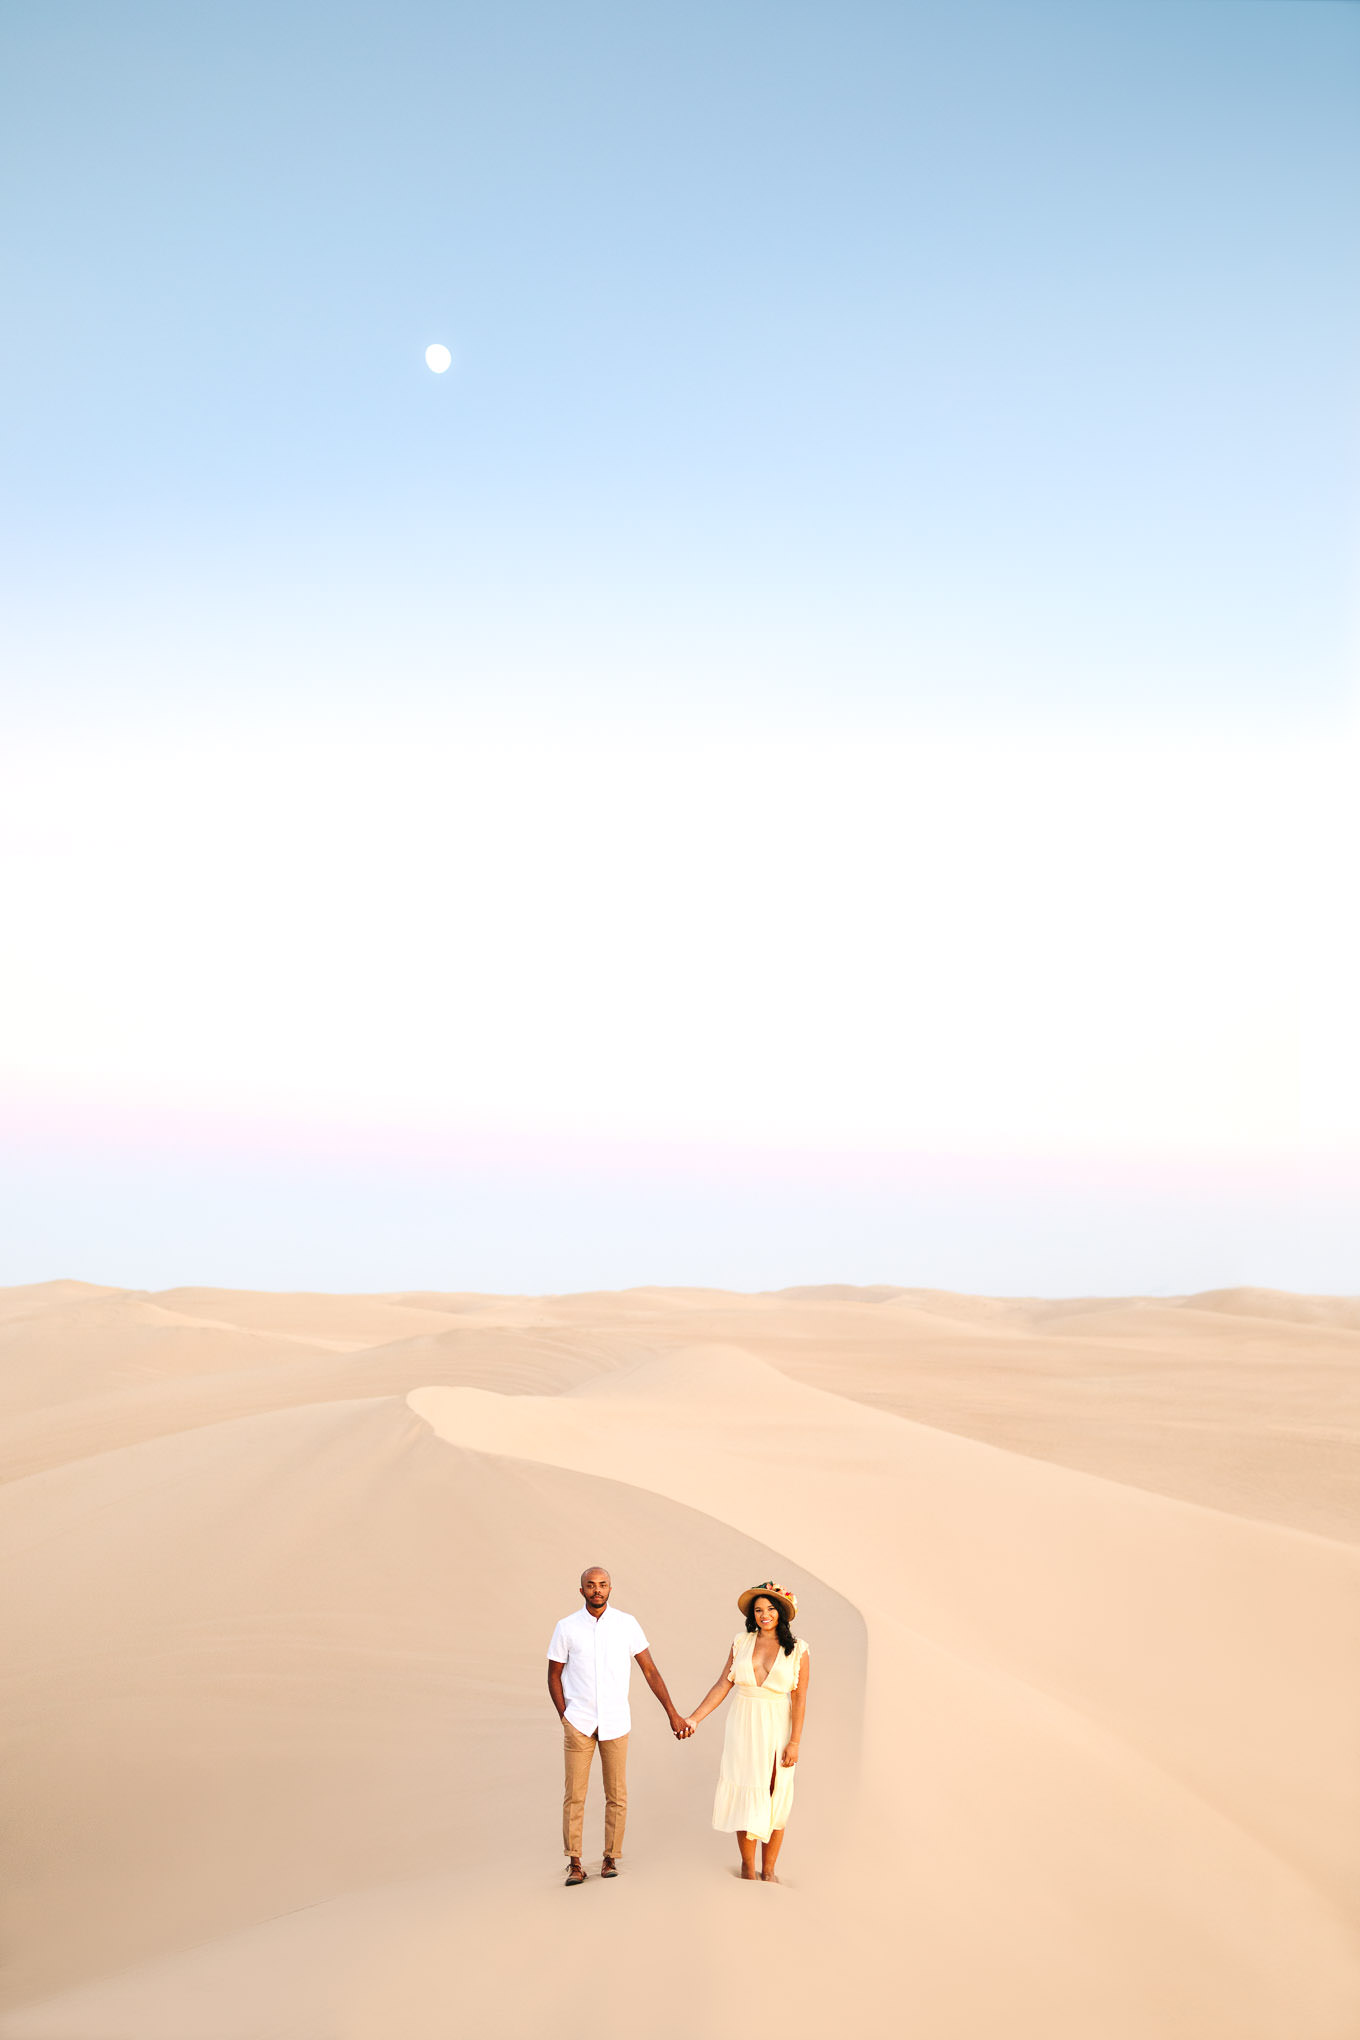 Engaged couple walking the along a sand dune at sunset | California Sand Dunes engagement session | Colorful Palm Springs wedding photography | #palmspringsphotographer #sanddunes #engagementsession #southerncalifornia  Source: Mary Costa Photography | Los Angeles